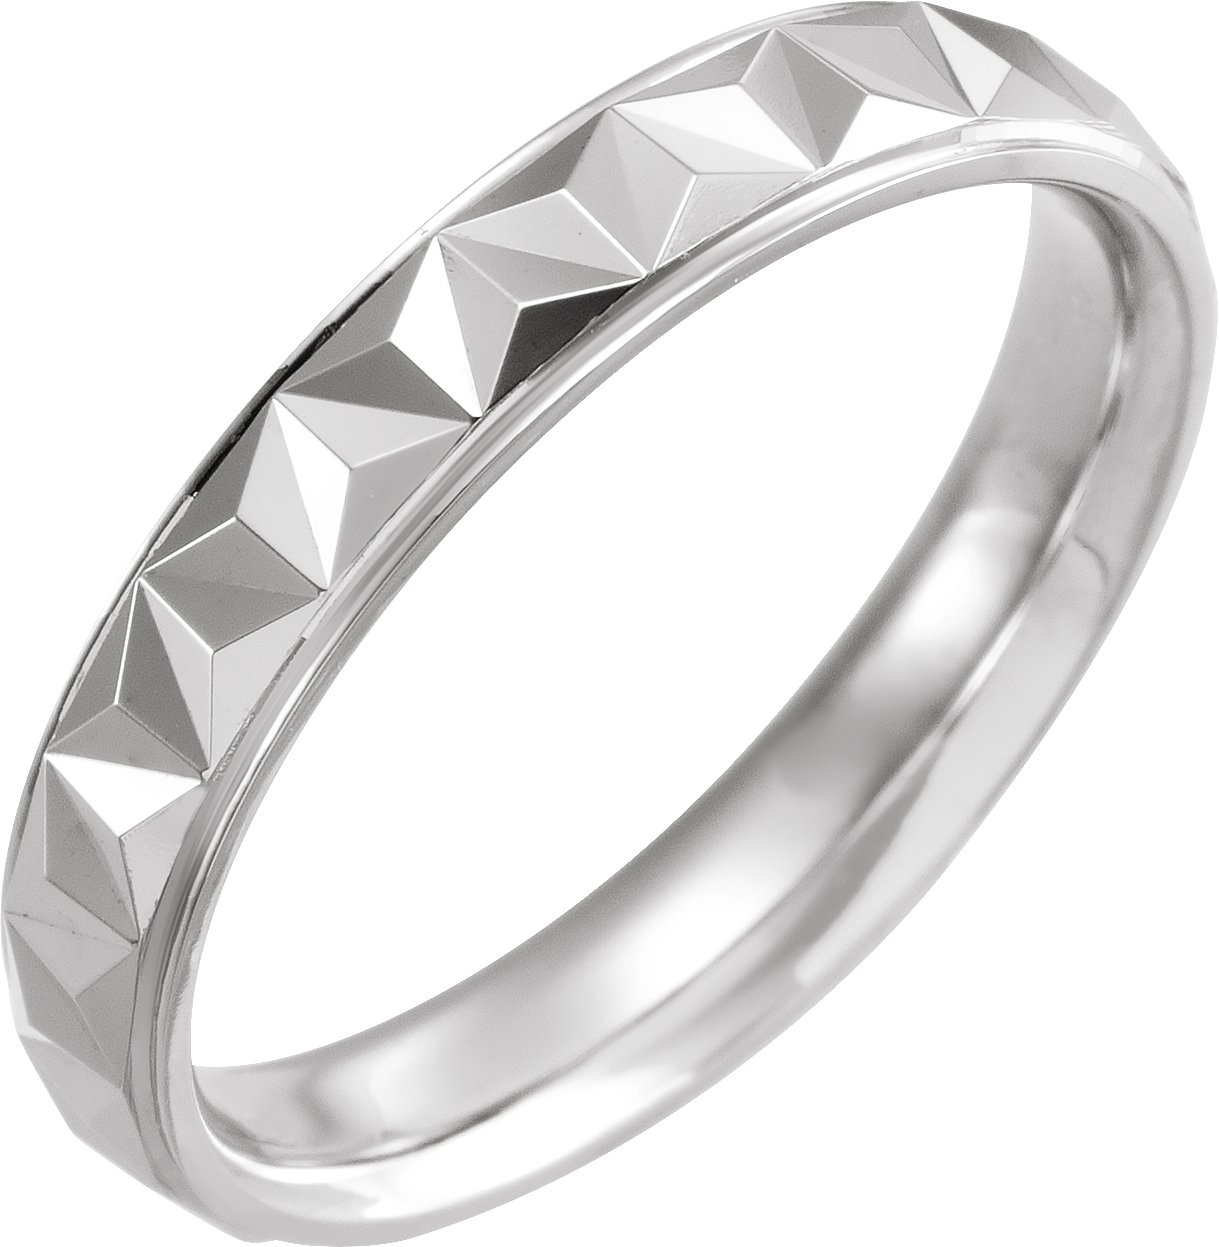 Continuum Sterling Silver 4 mm Geometric Band with Polished Finish Size 14